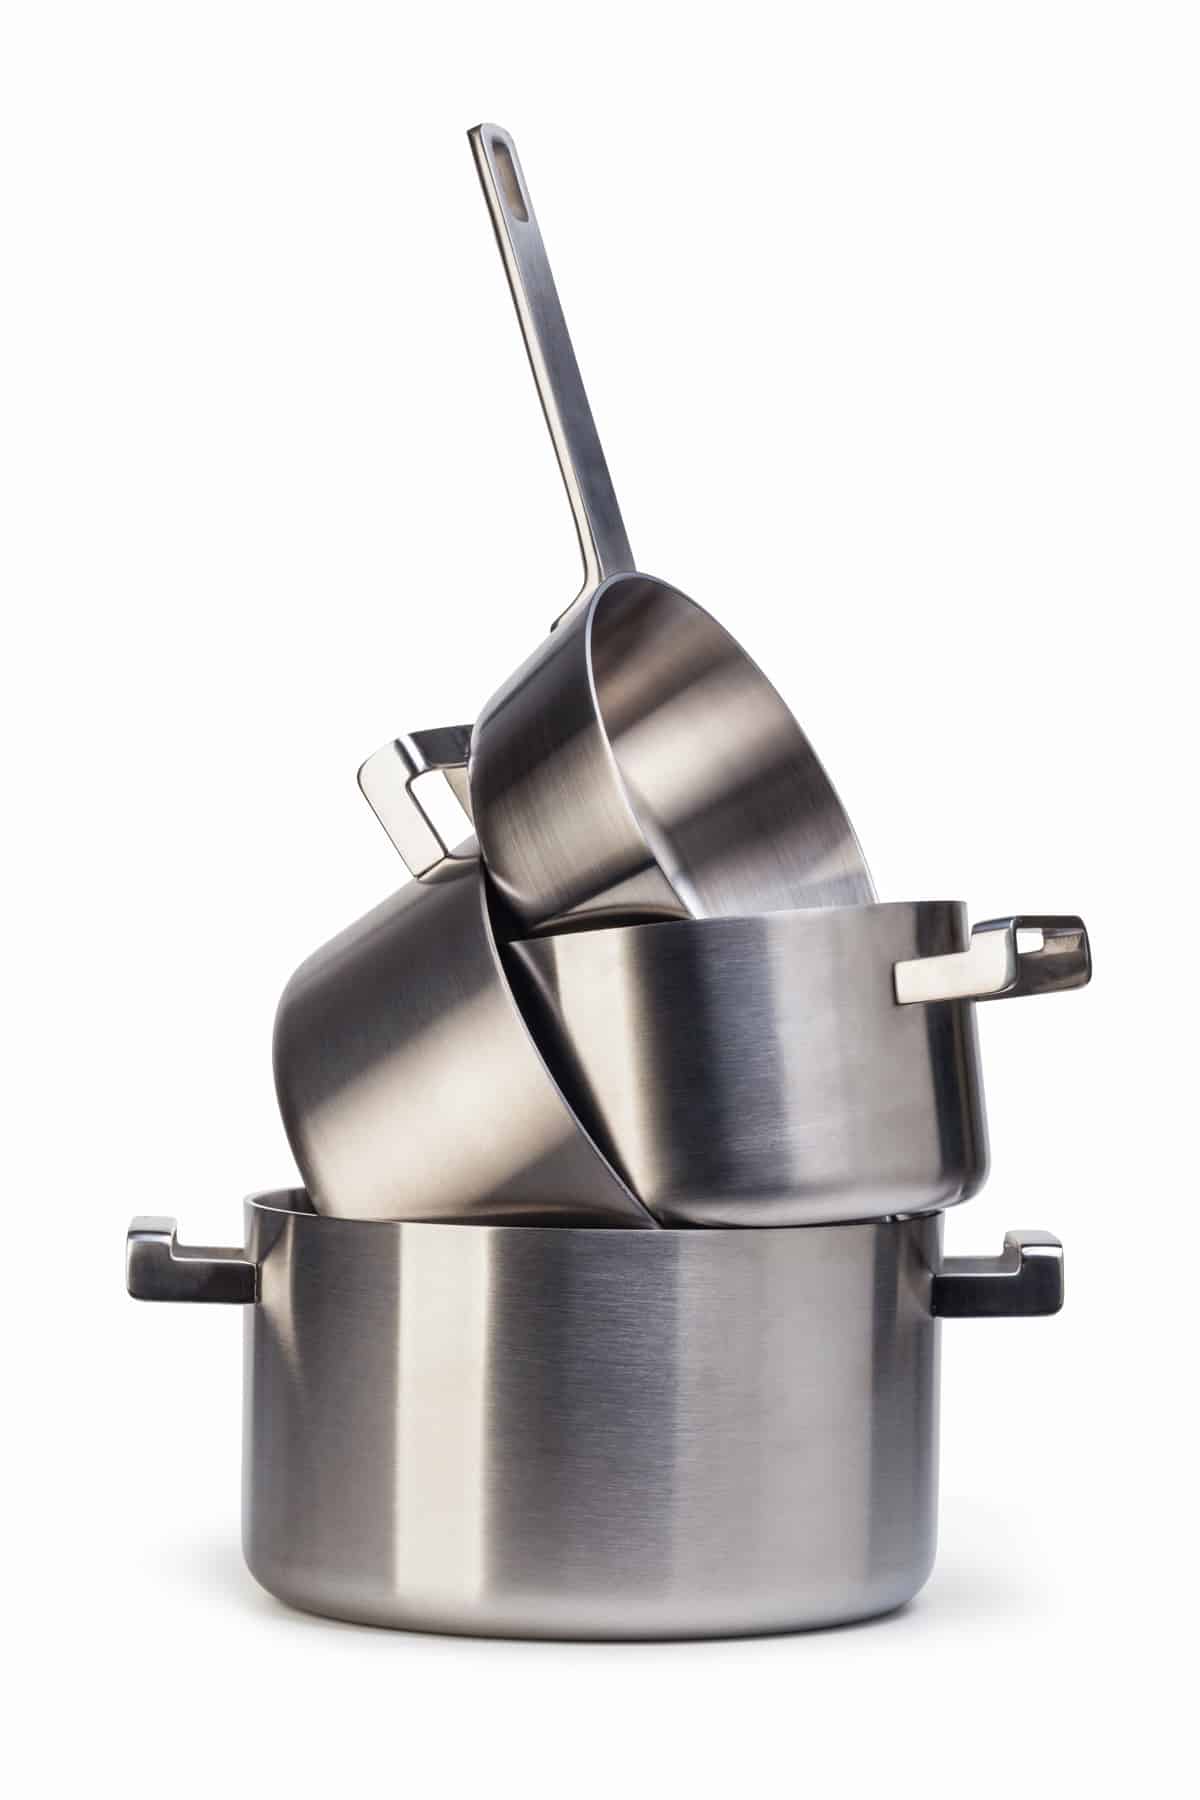 Four stainless steel pots stacked on top of each other.